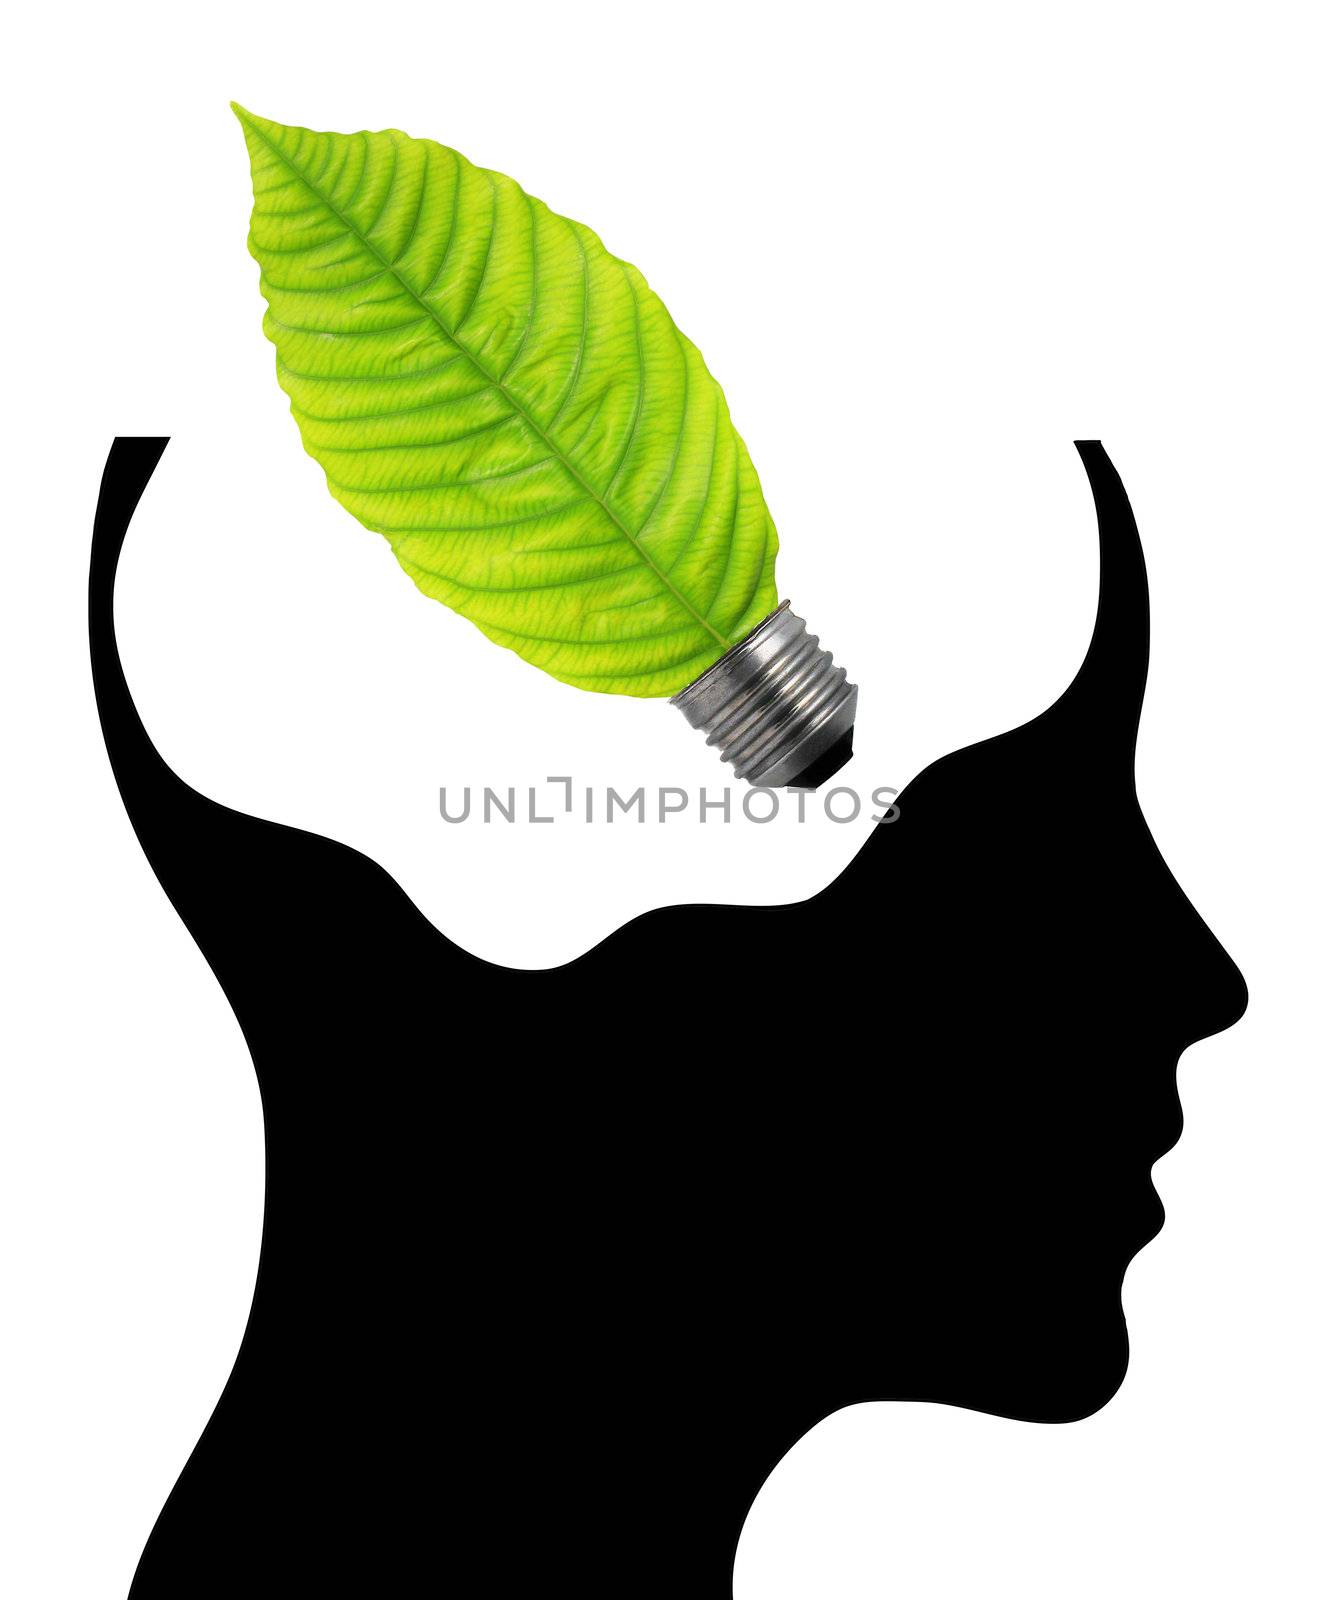 bulb with ecology symbol in human head,